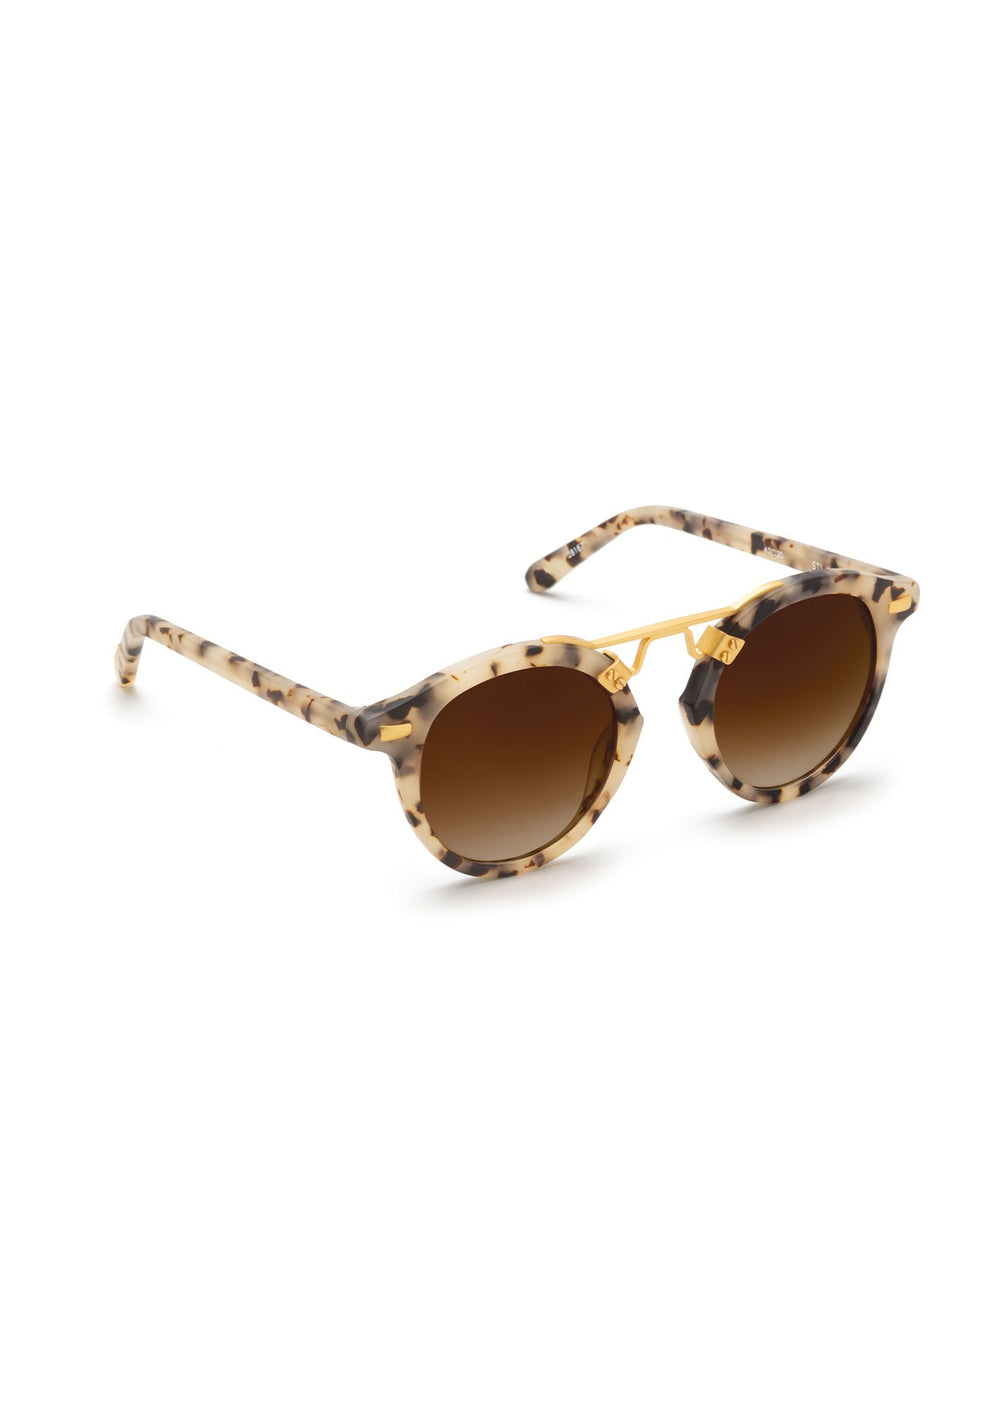 KREWE - ST. LOUIS KIDS | Matte Oyster 24K handcrafted, luxury tortoise shell sunglasses made for children featuring krewe's iconic double metal bridge